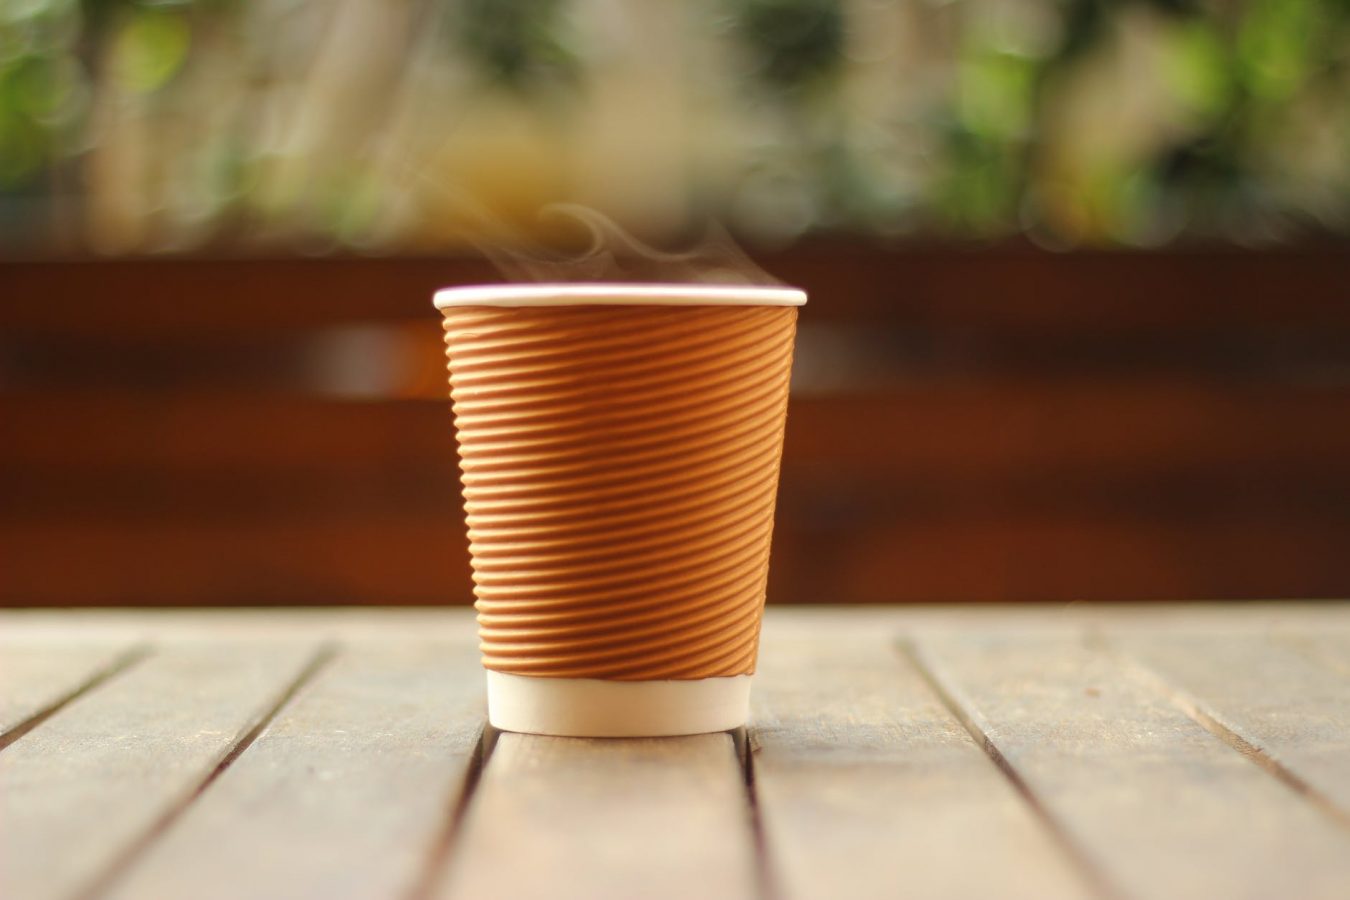 Three ingenious ways to solve the UK’s disposable coffee cup problem